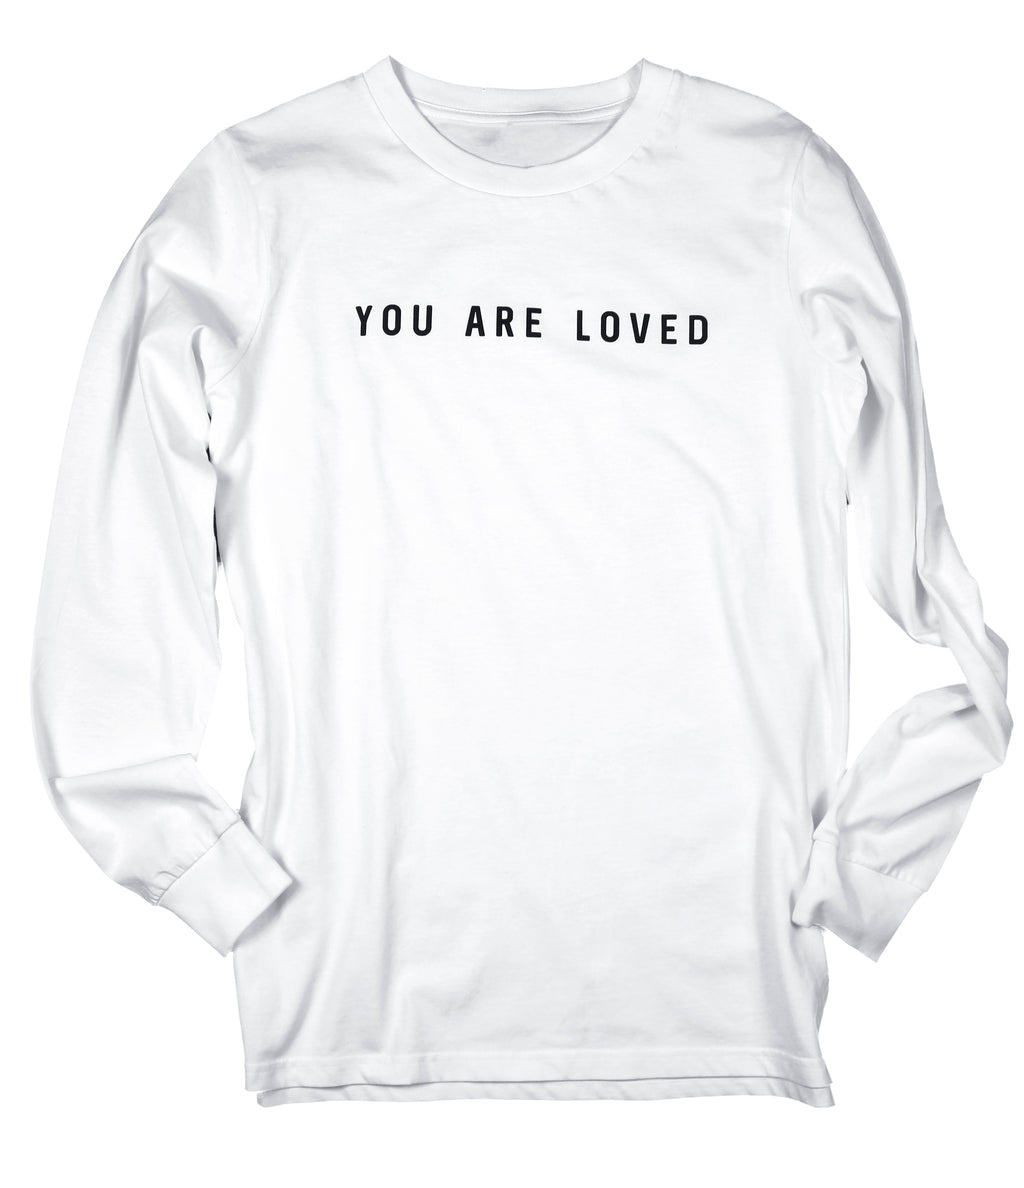 YOU ARE LOVED LONG SLEEVE TEE